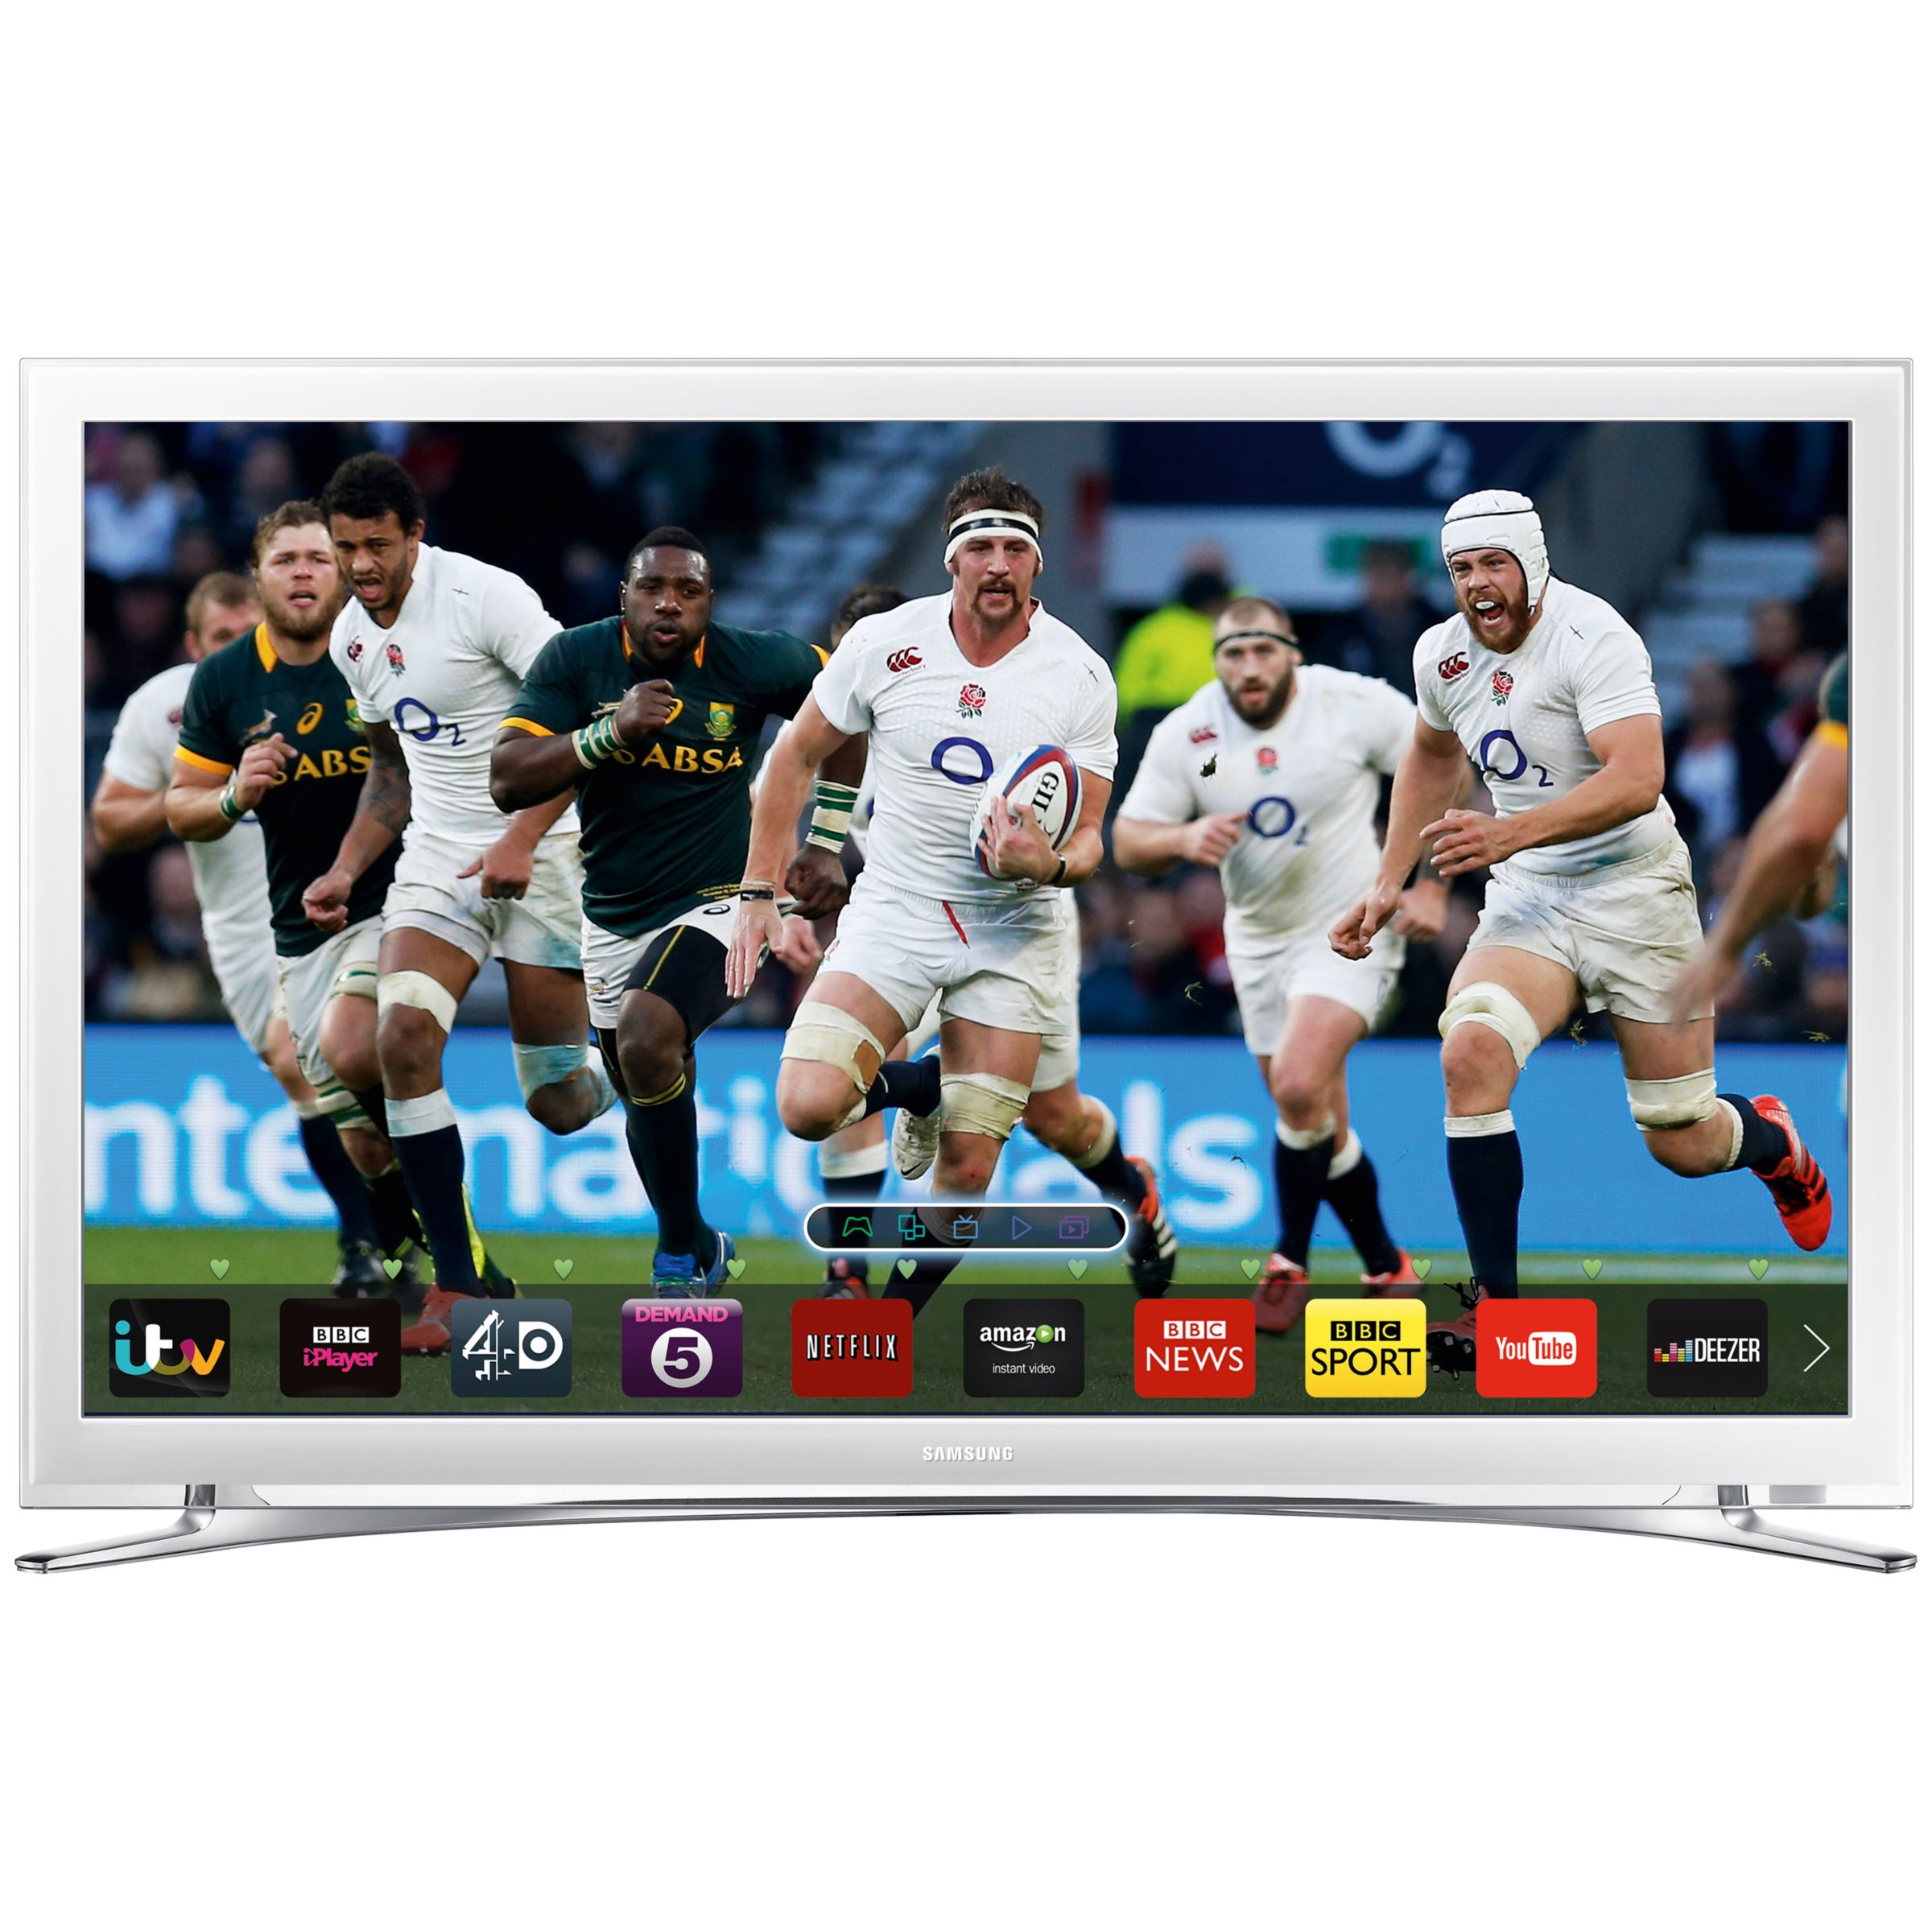 Samsung UE22H5600 Series LED HD 1080p Smart TV, 22" with Freeview HD